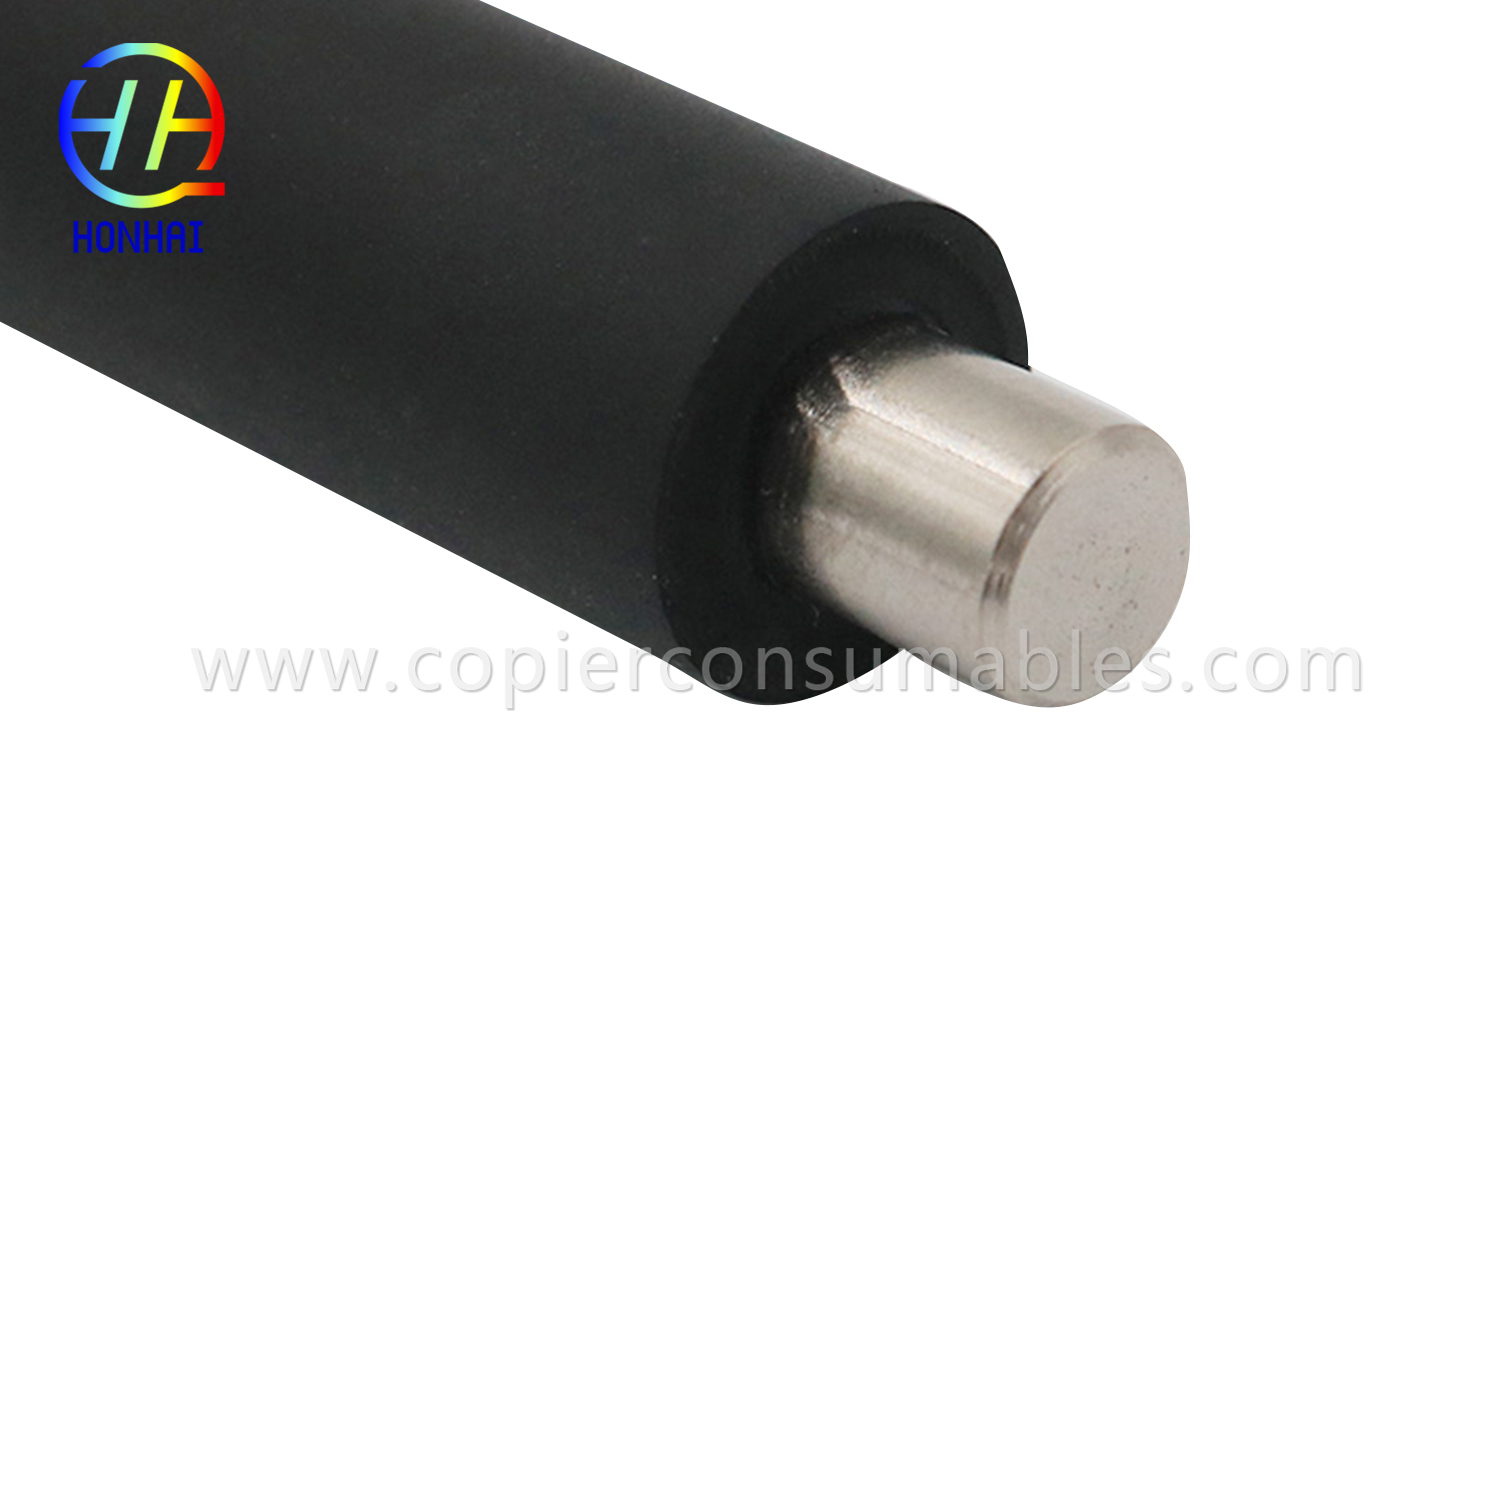 Primary Charge Roller for Xerox Workcentre C550 560 570  (2)